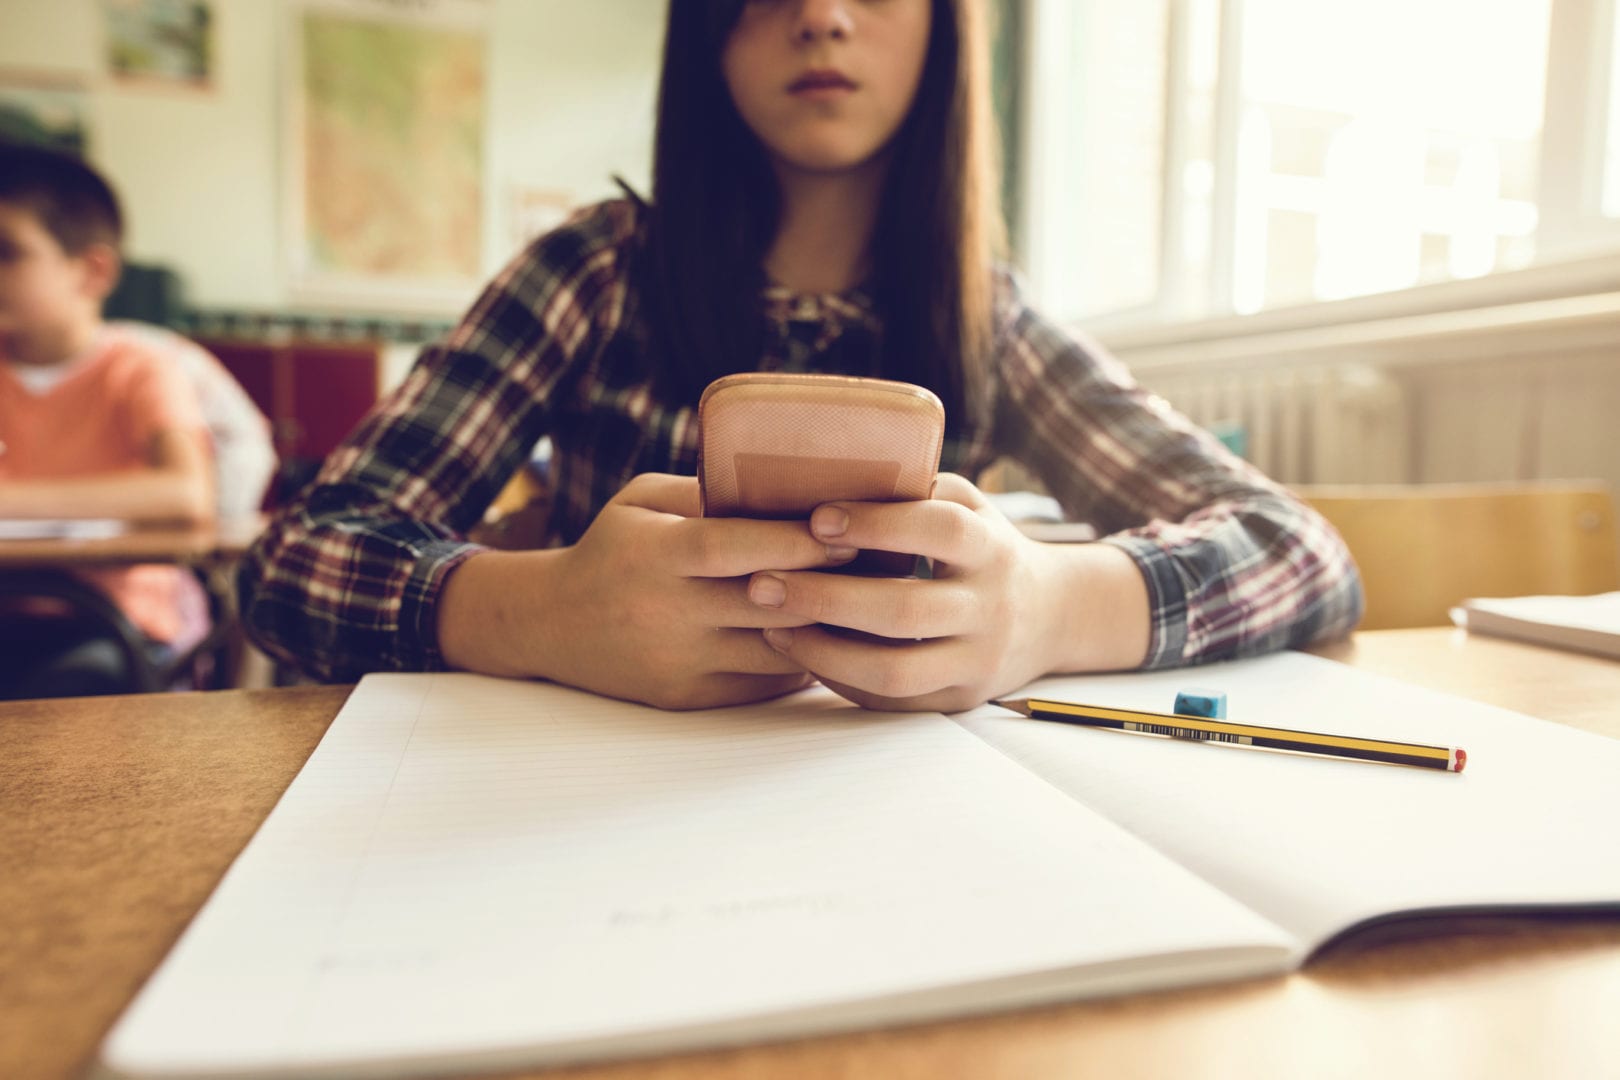 Parents are texting their kids in class so much that schools are banning phones